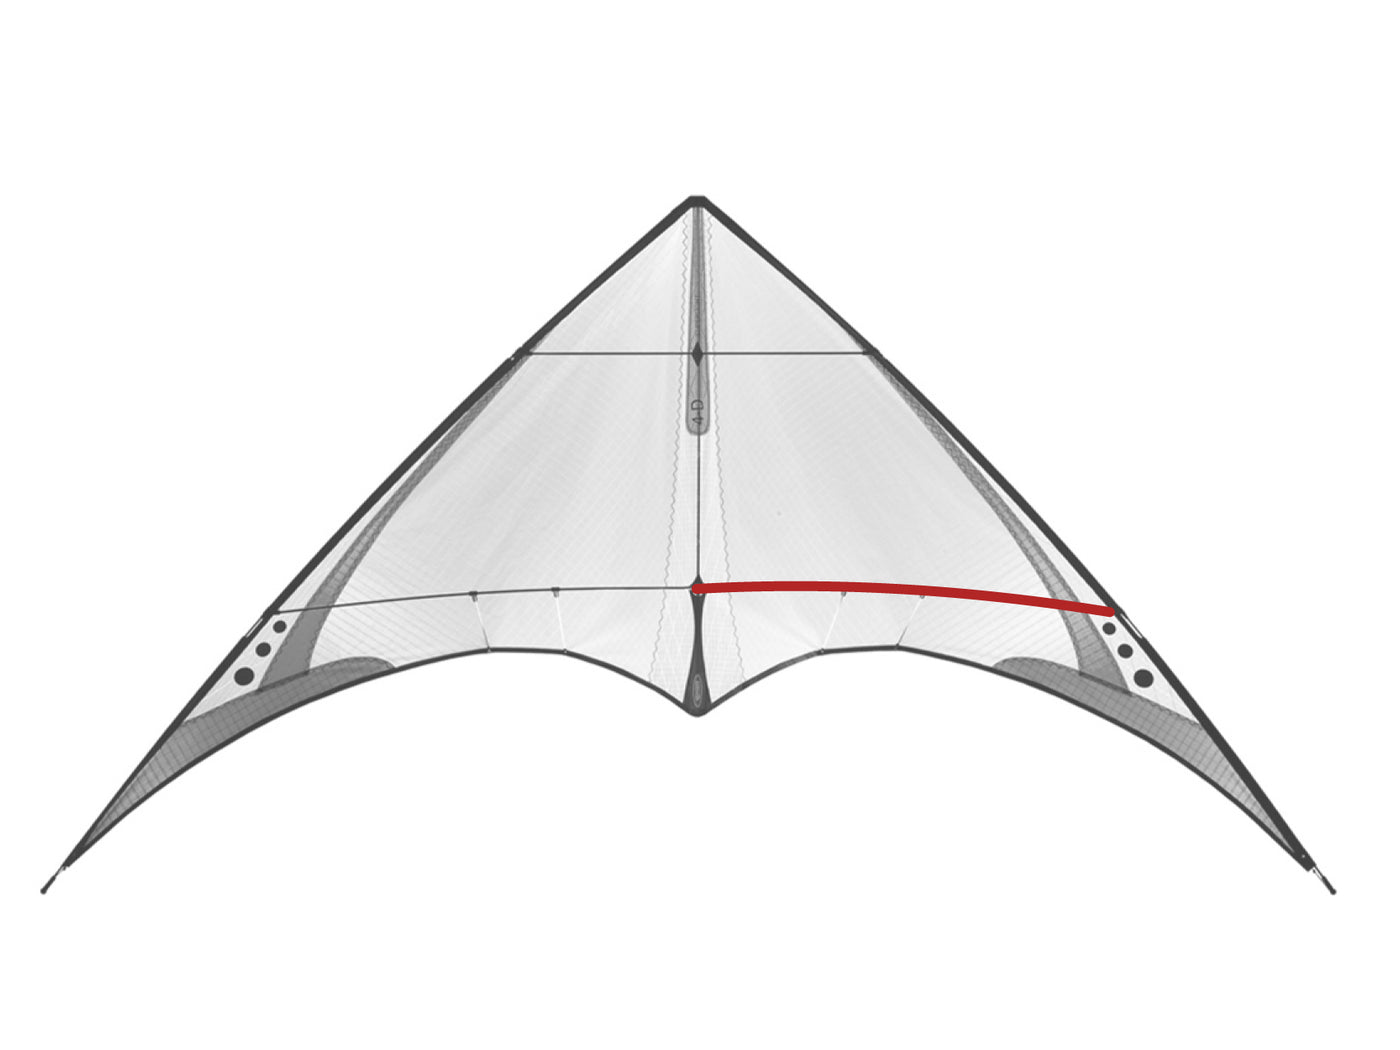 Diagram showing location of the 4-D Lower Spreader on the kite.